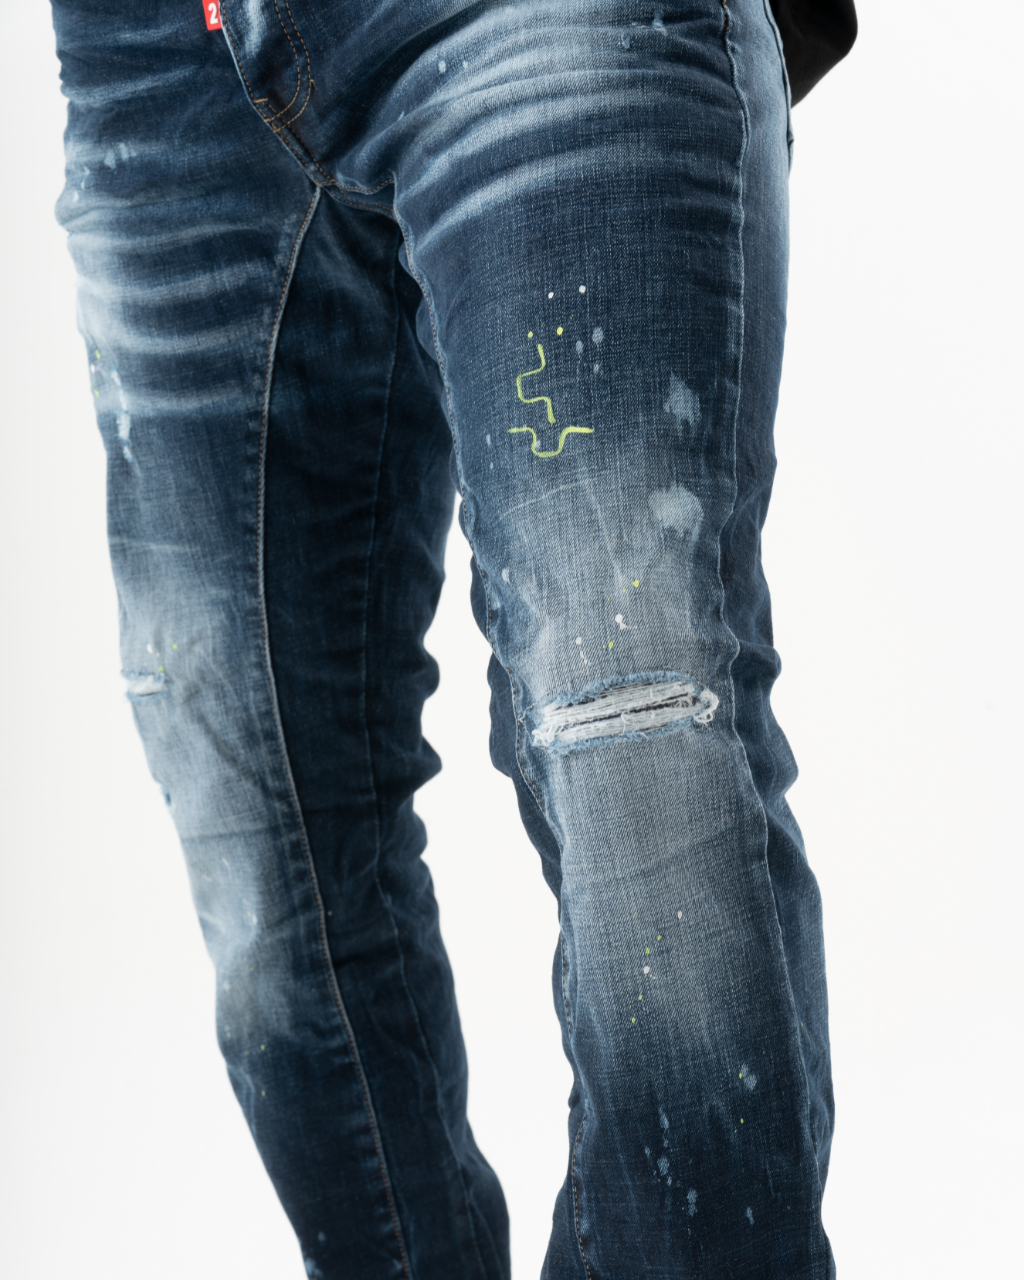 The back of a man wearing a pair of INCOGNITO jeans.